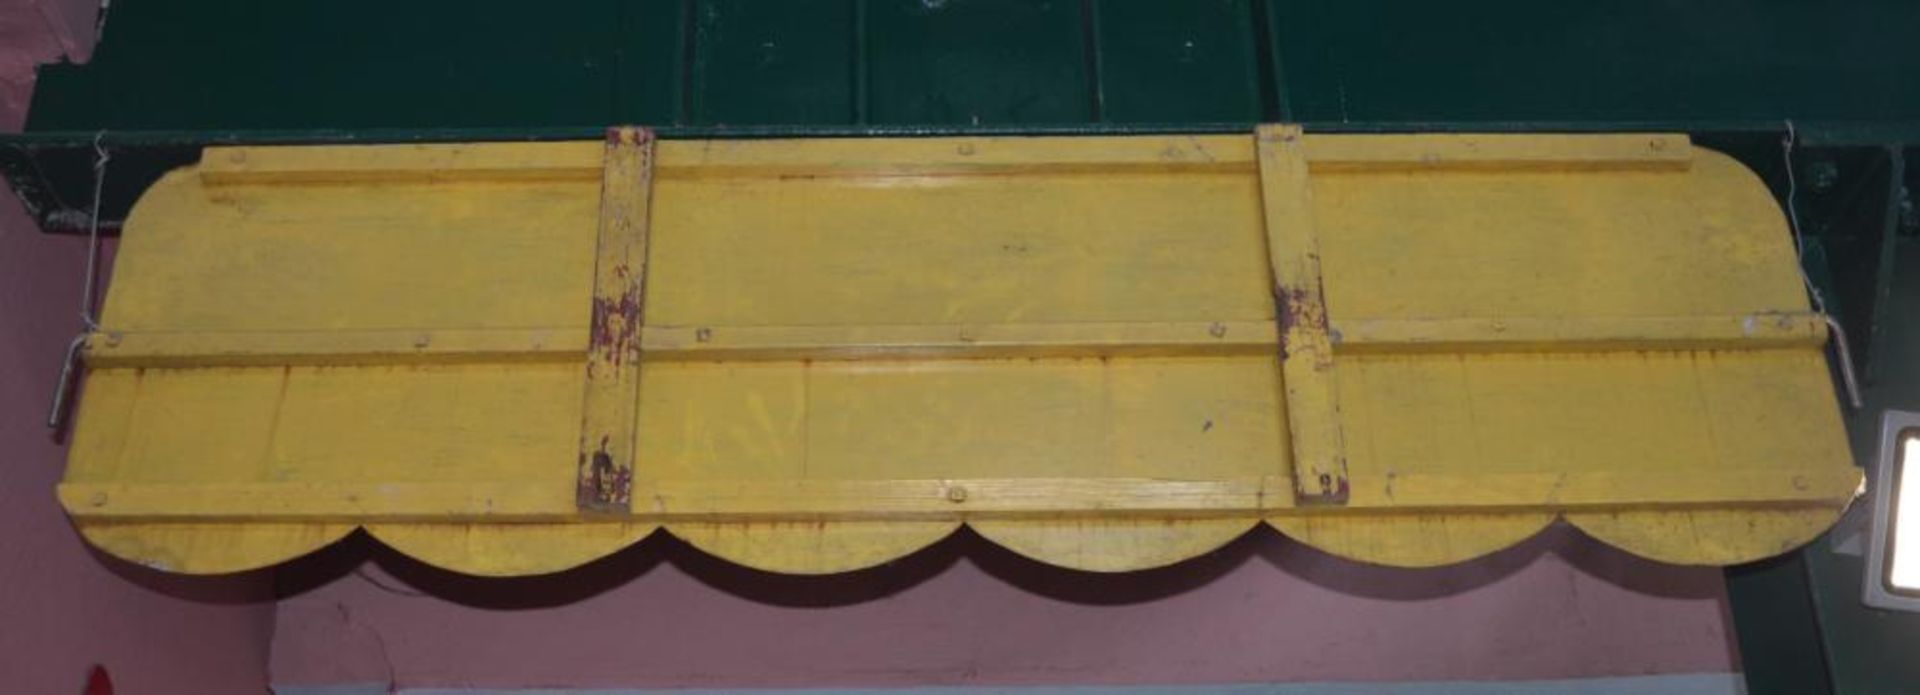 1 x Vintage Metal Hand Painted Fairground Ride Barrier Fence Panel With Braced Back and Mounting Hoo - Image 3 of 3